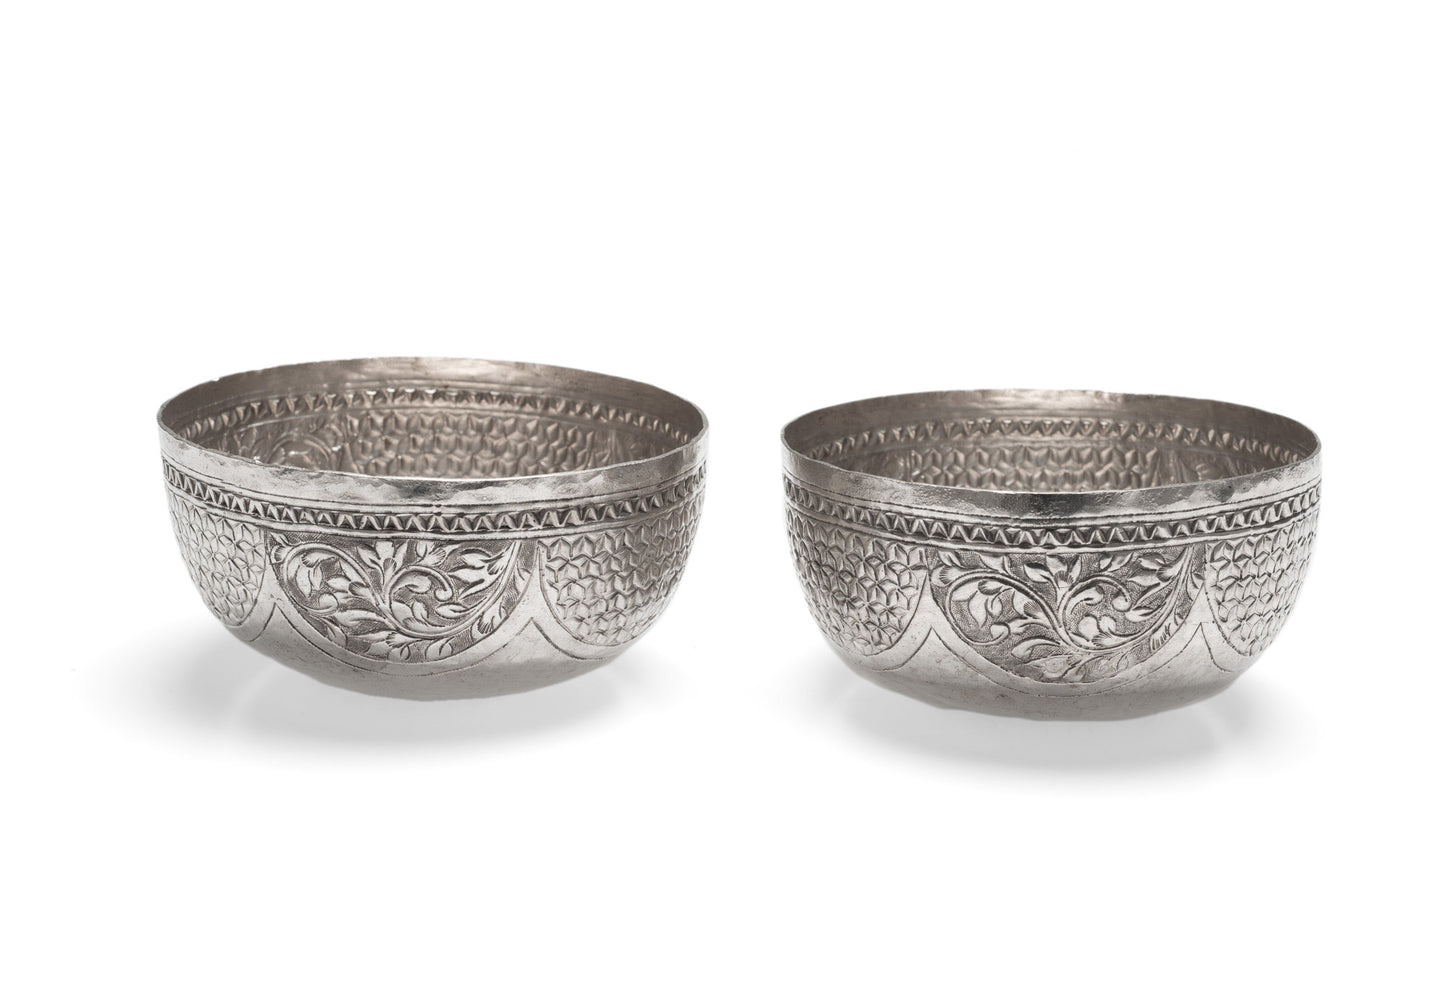 Pair Antique Indian Sterling Silver Repousse Bowls for Foliate Patterns c1880 (Code 2407)